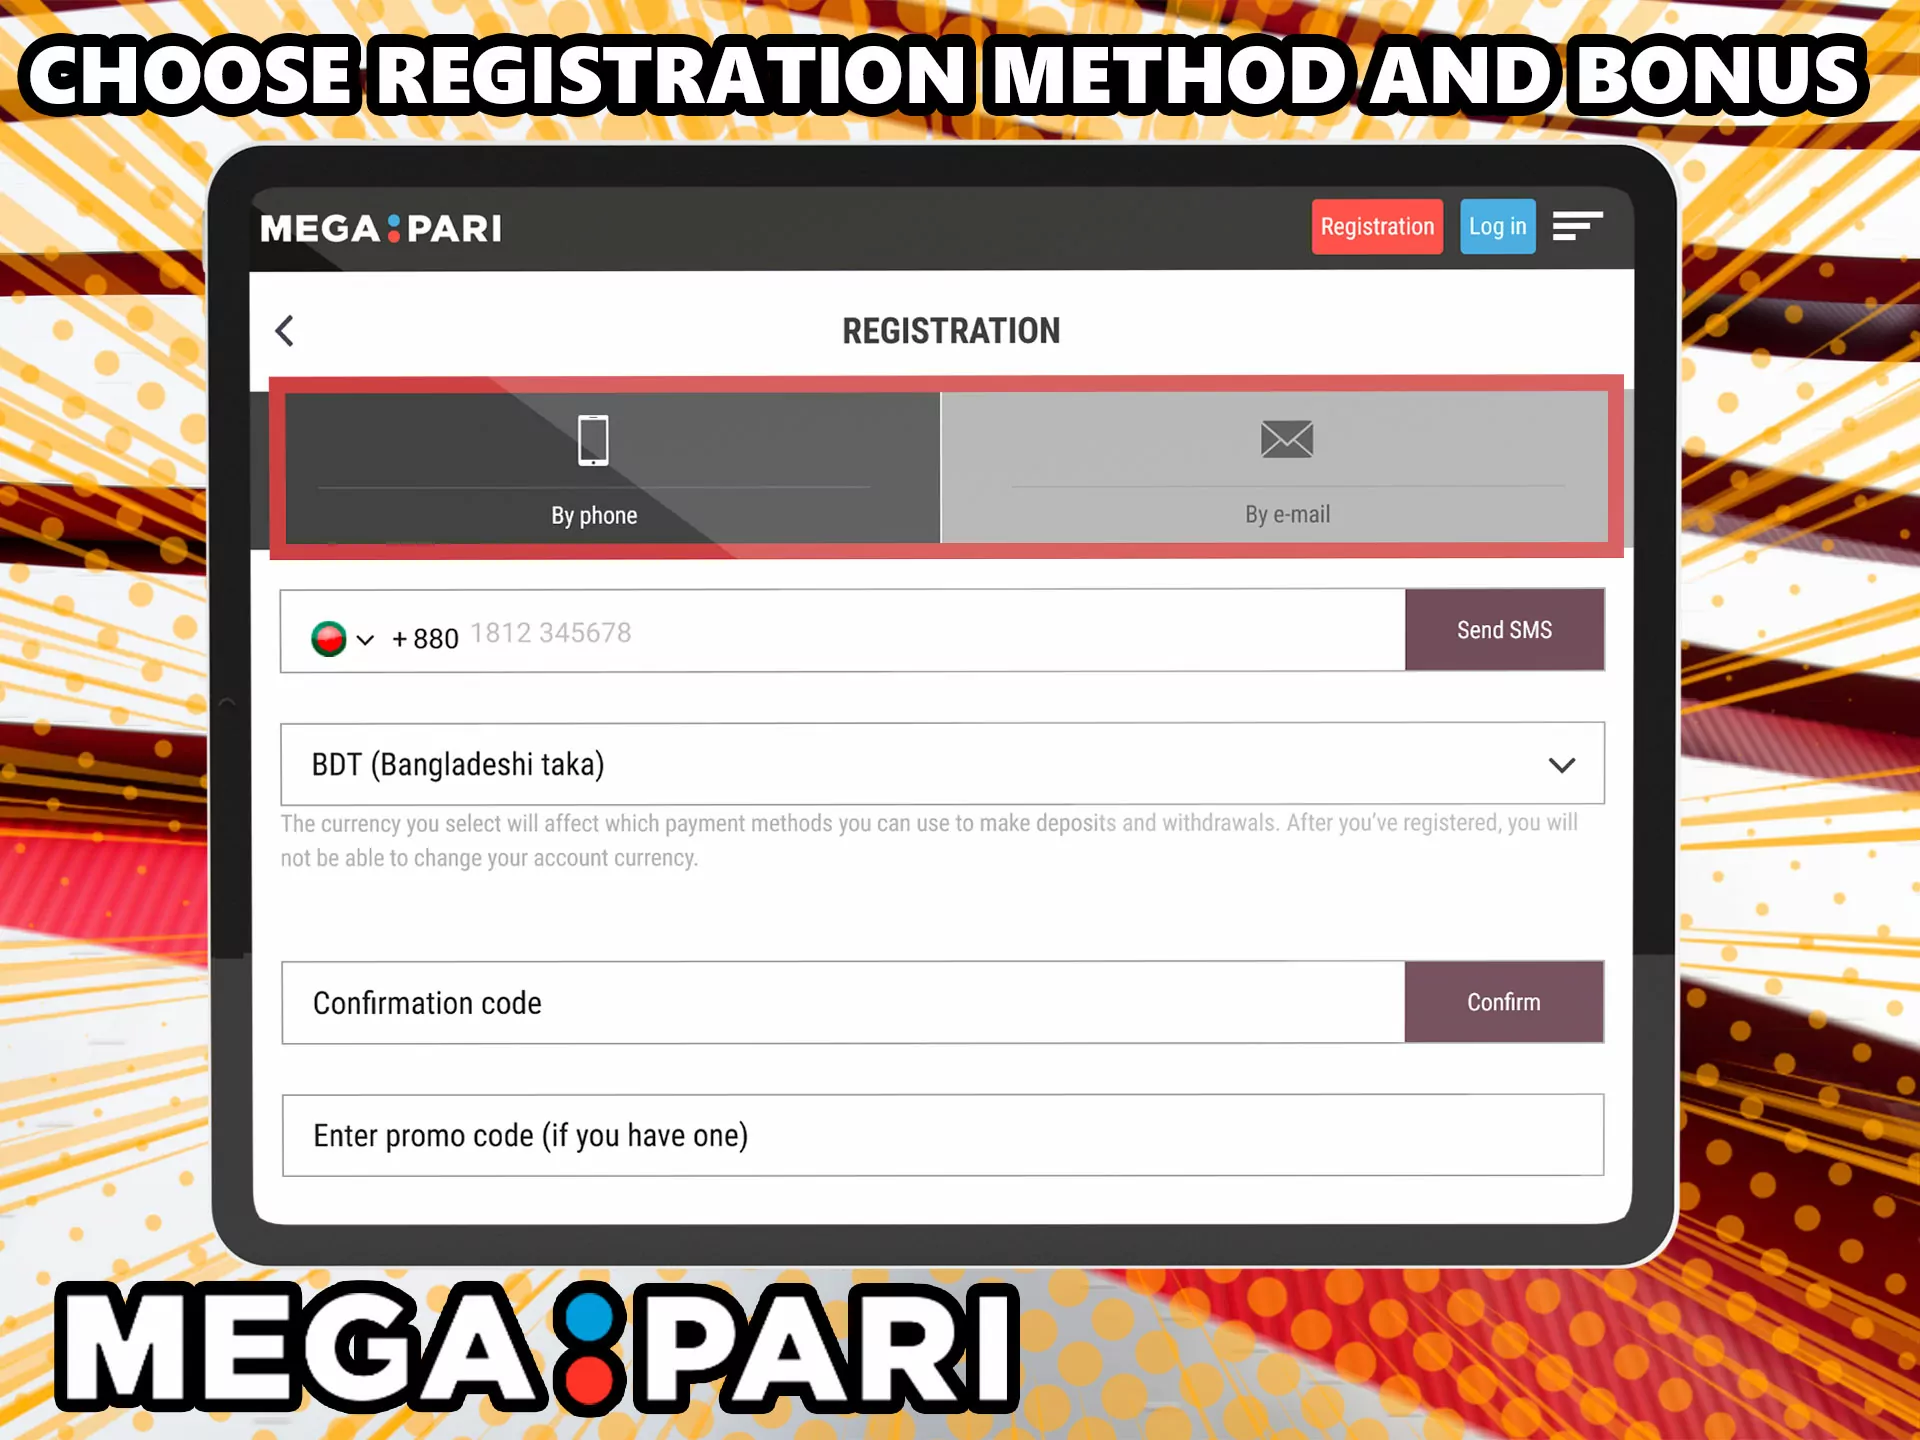 Next, you need to decide on the place of registration, just mark the one that is more convenient for you.